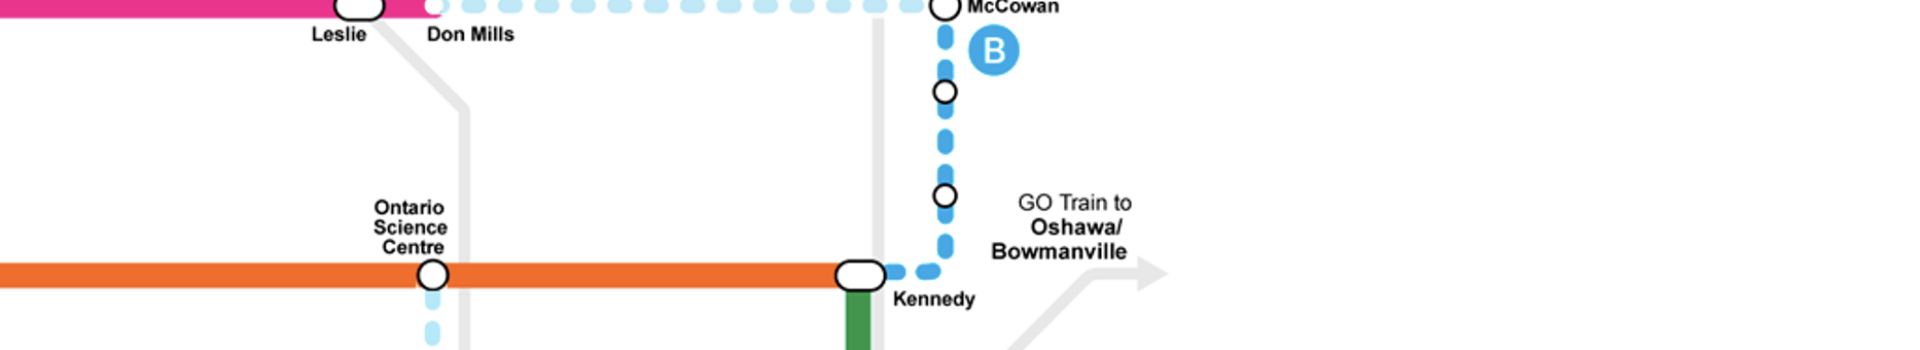 Portion of the toronto transit map displaying the location of the Scarborough Subway Extension